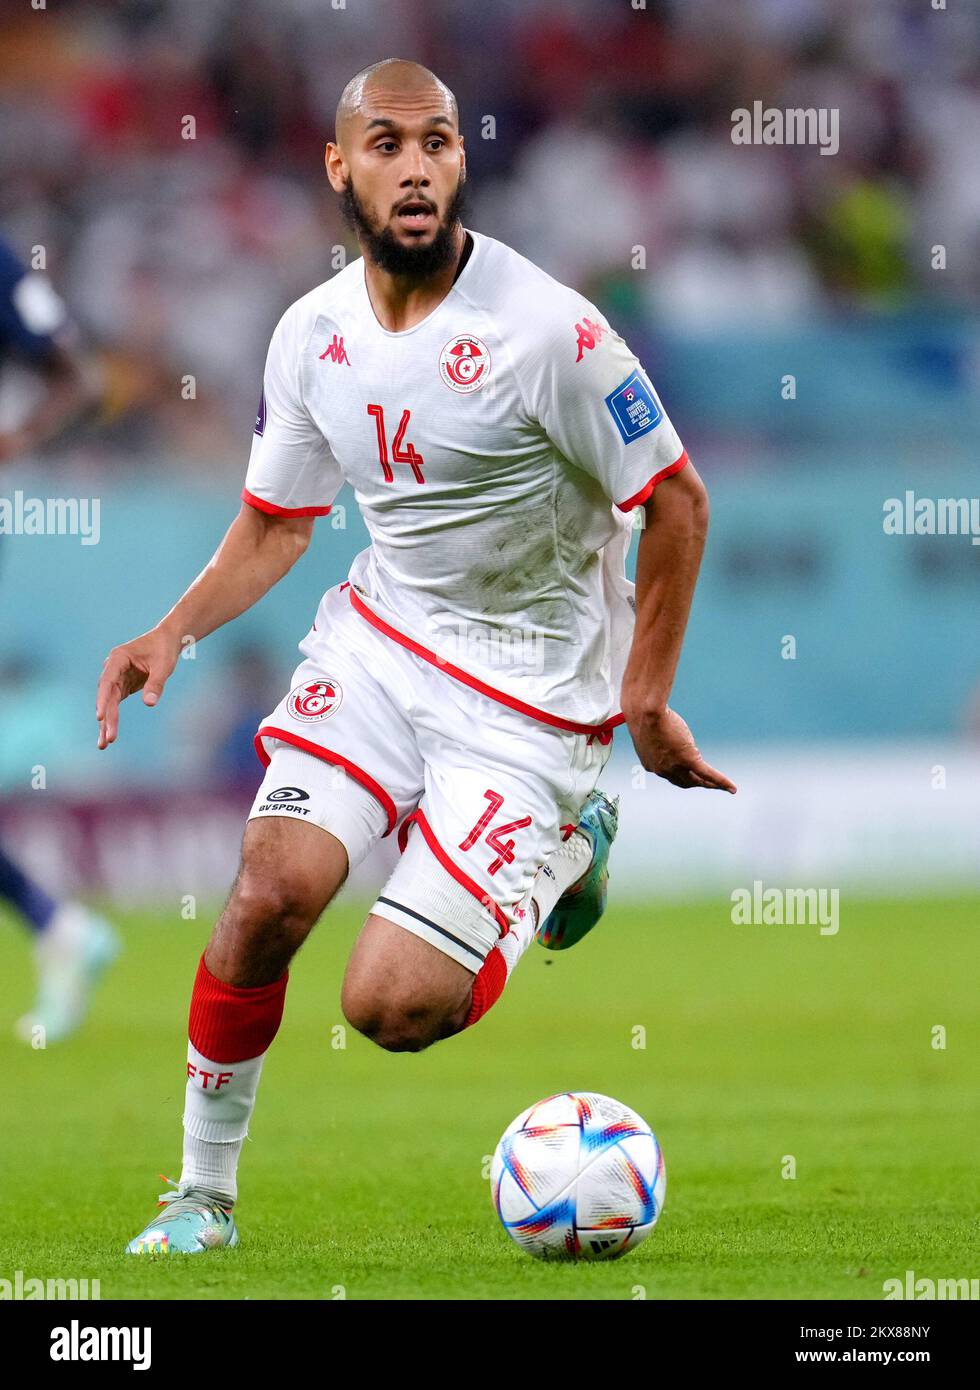 Tunisia's Aissa Laidouni during the FIFA World Cup Group D match at the Education City Stadium in Al Rayyan, Qatar. Picture date: Wednesday November 30, 2022. Stock Photo